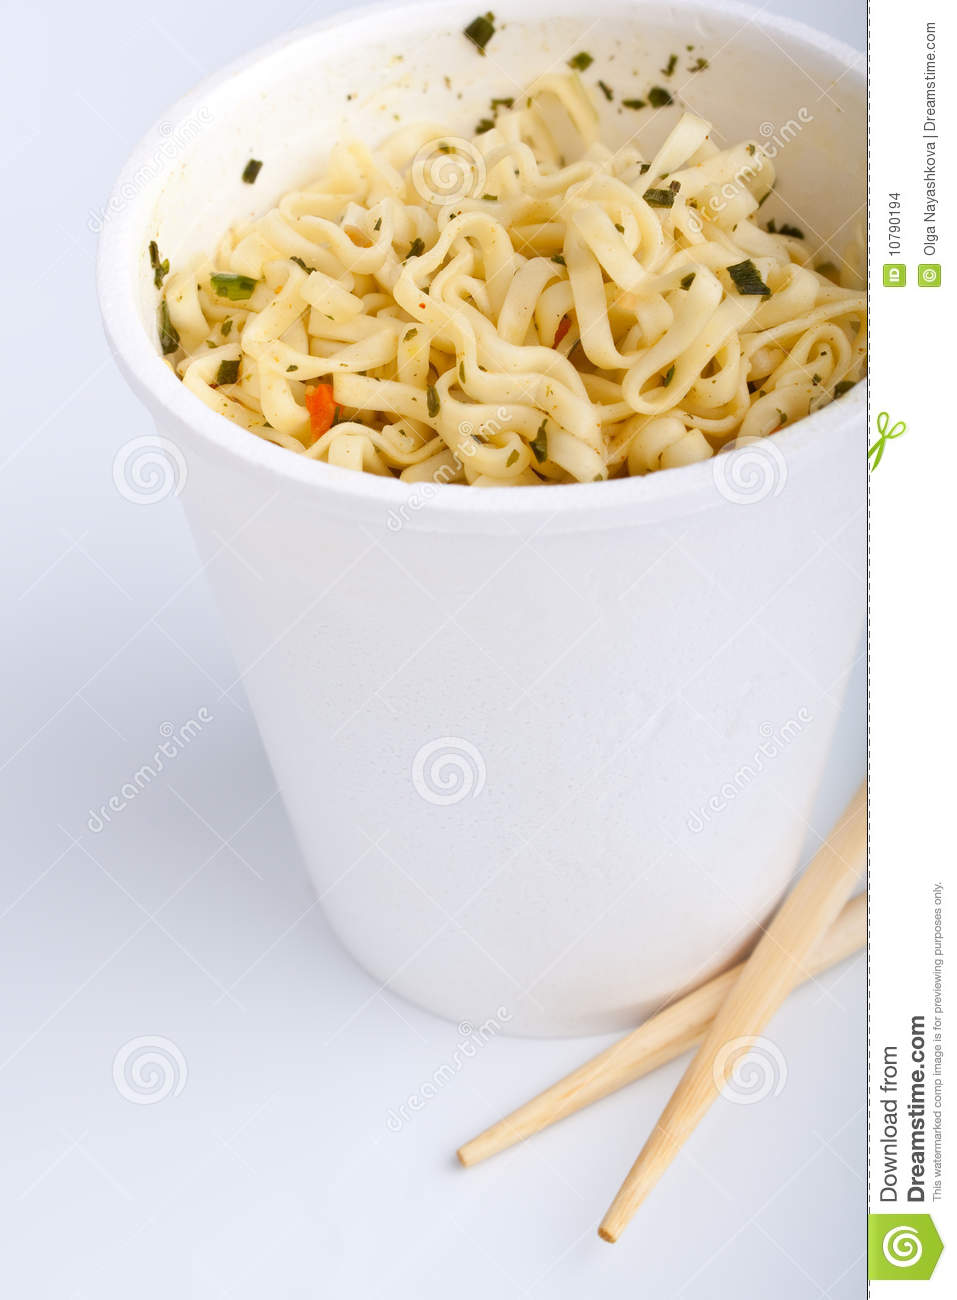 Cup Of Ramen Noodles Stock Images   Image  10790194